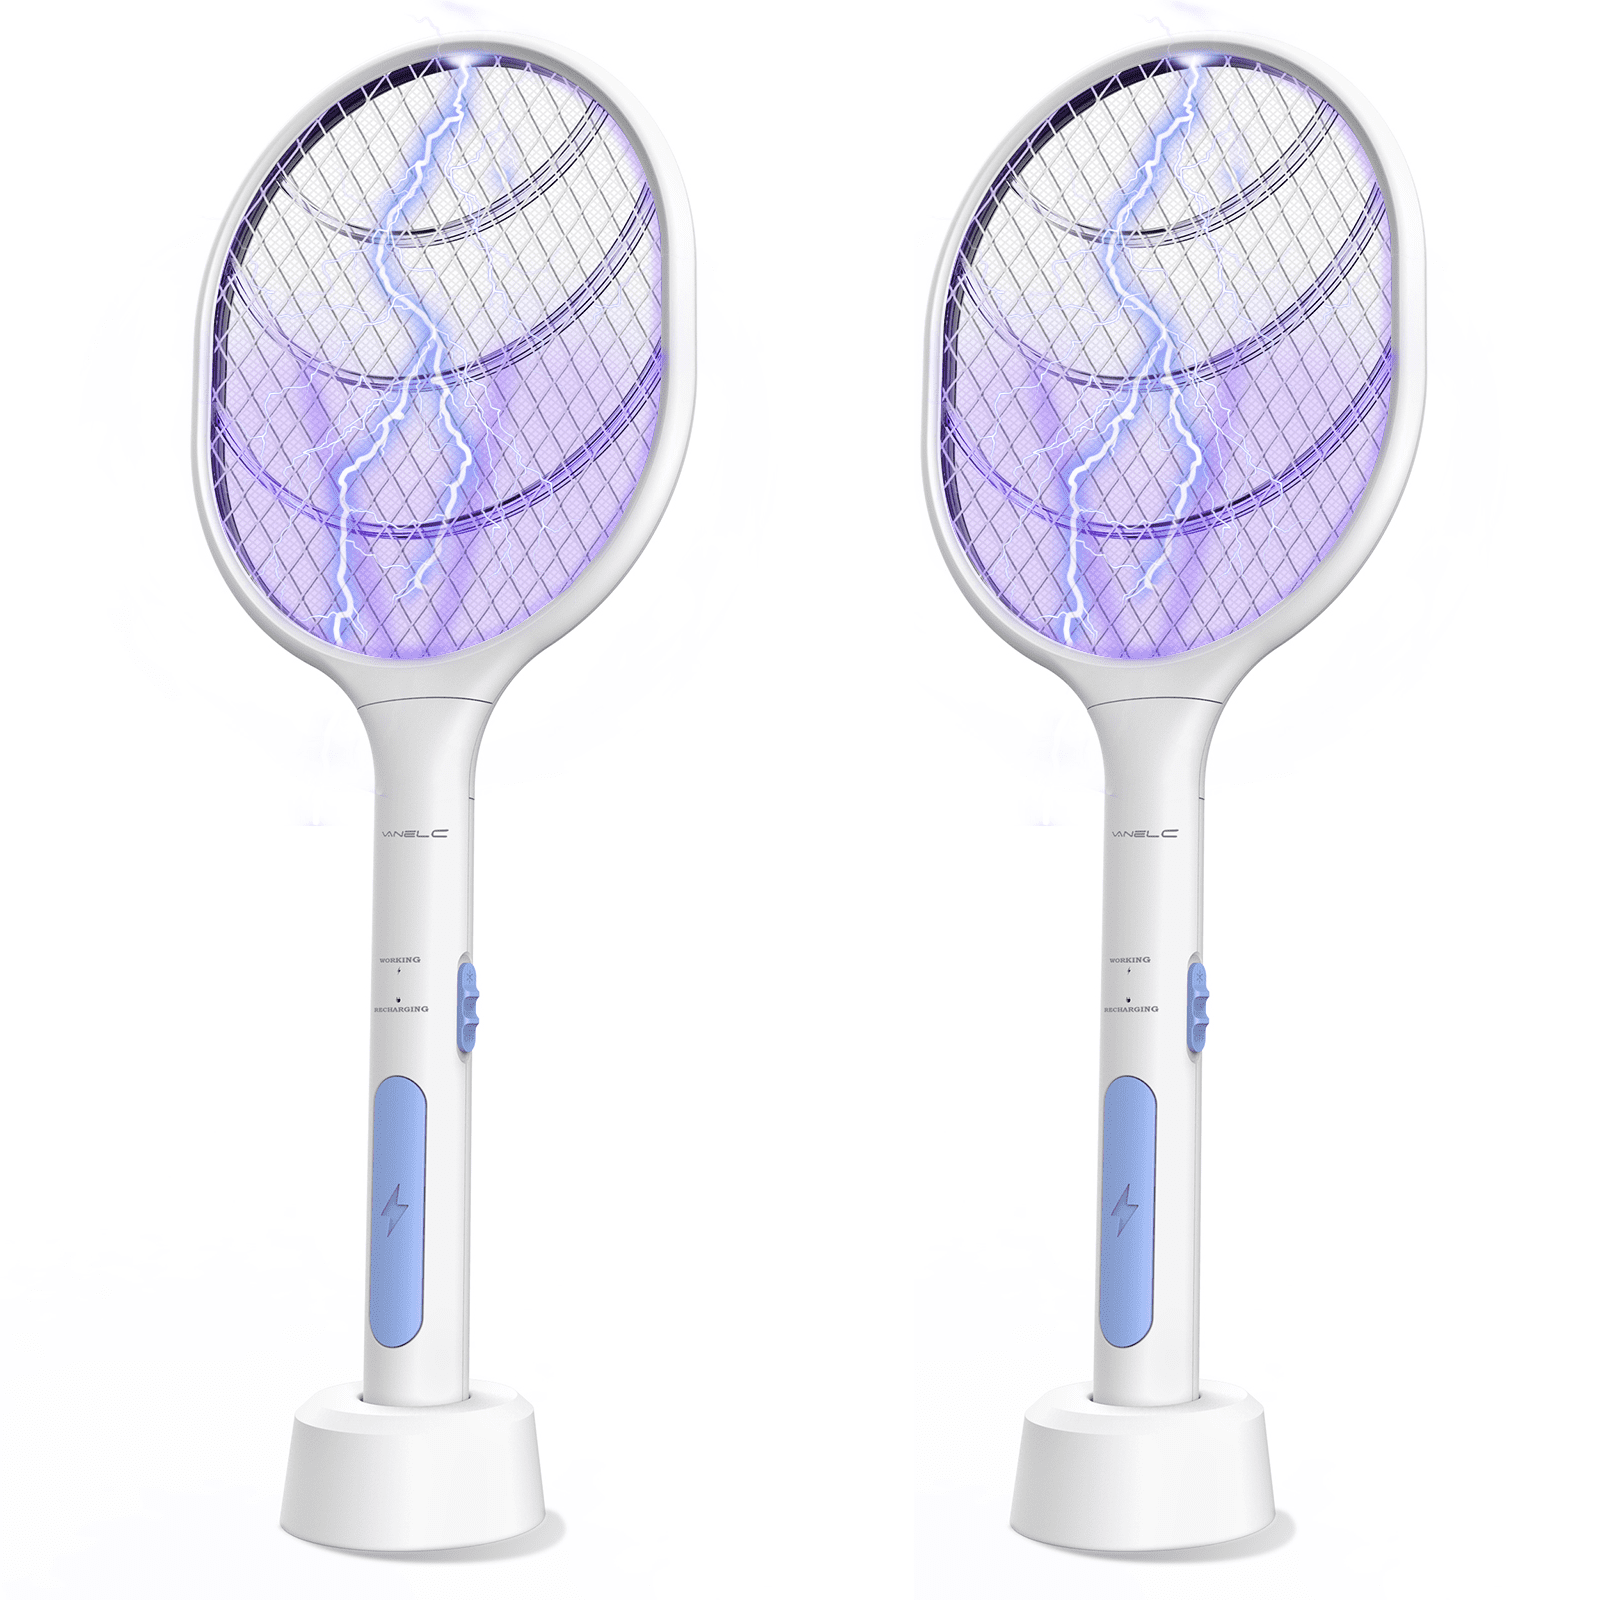 Bright LED Light to Zap in The Dark 4000 Volt Rechargeable Via USB Unique 3-Layer Safety Mesh Thats Safe to Touch Fly Killer and Bug Zapper Racket Electric Mosquito 